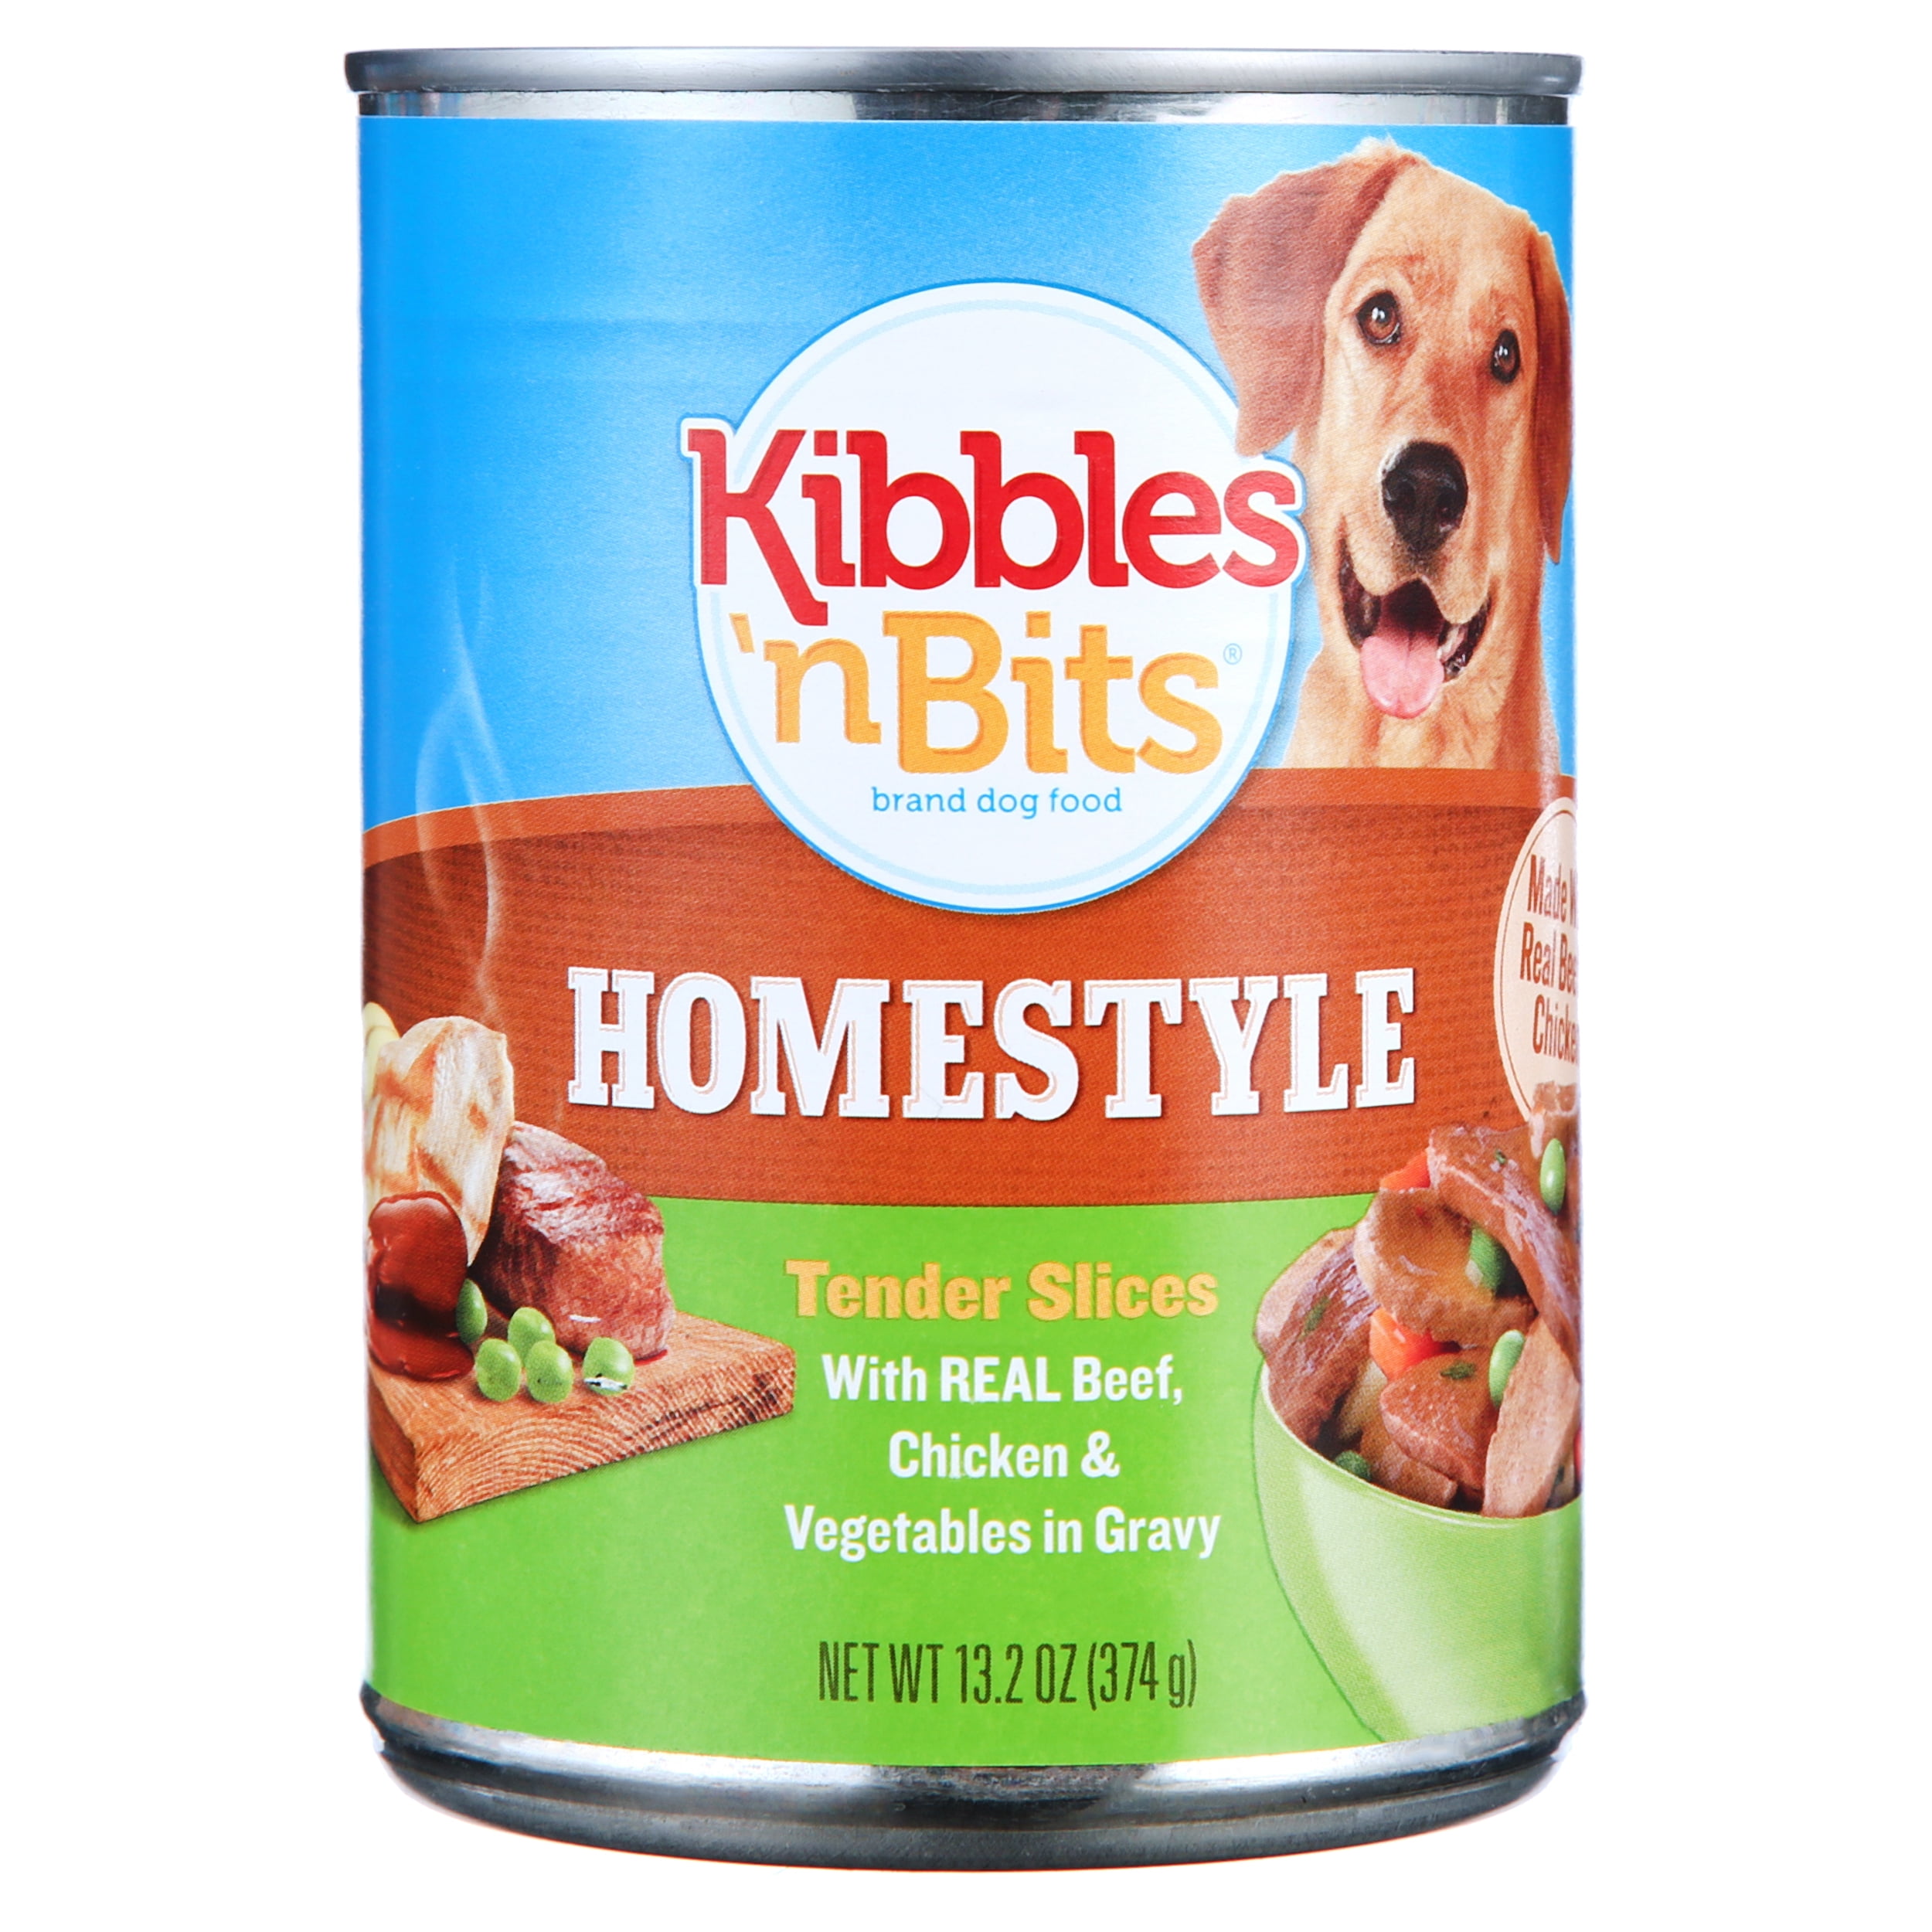 Kibbles 'n Bits Tender Cuts With Real Turkey, Bacon & Vegetables in Gravy  Wet Dog Food, 13.2-Ounce Cans, Shop